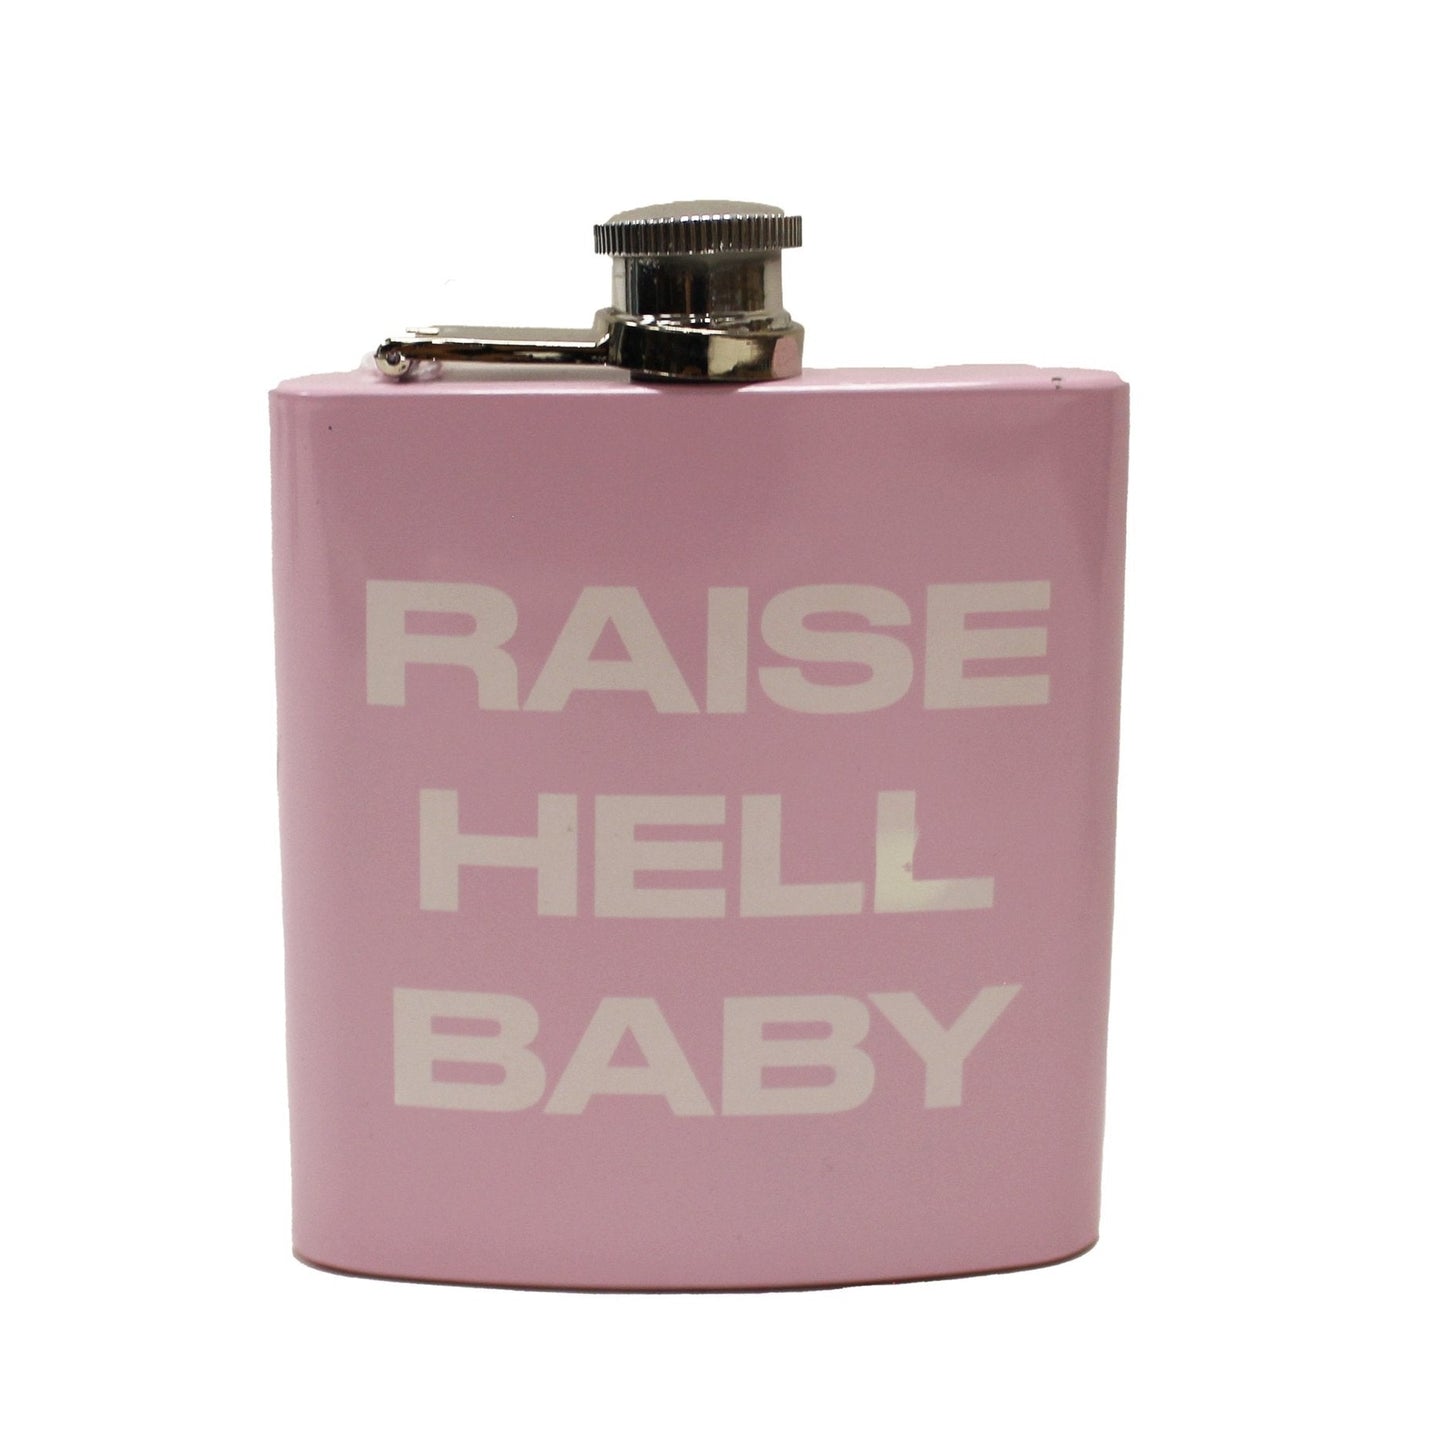 Flask - Pink - Raise Hell Baby